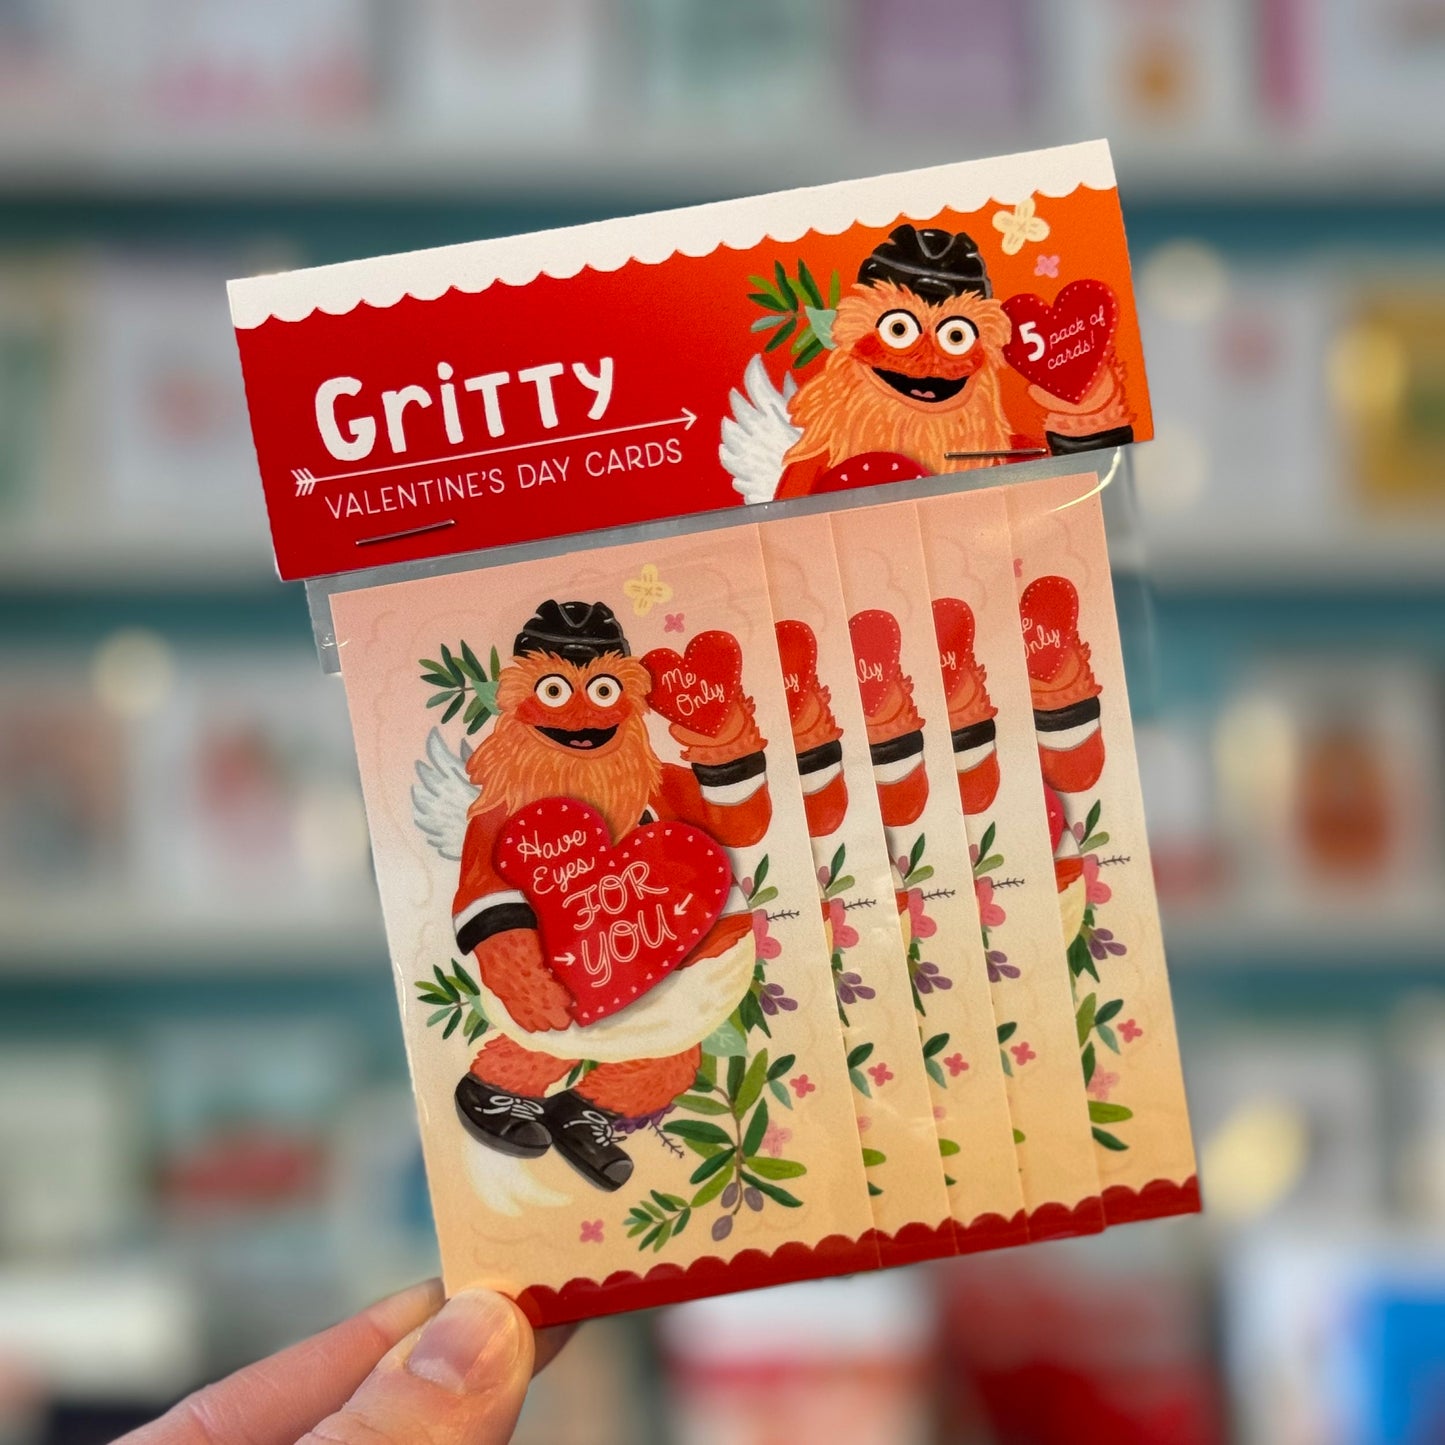 Gritty Valentine's Day Cards